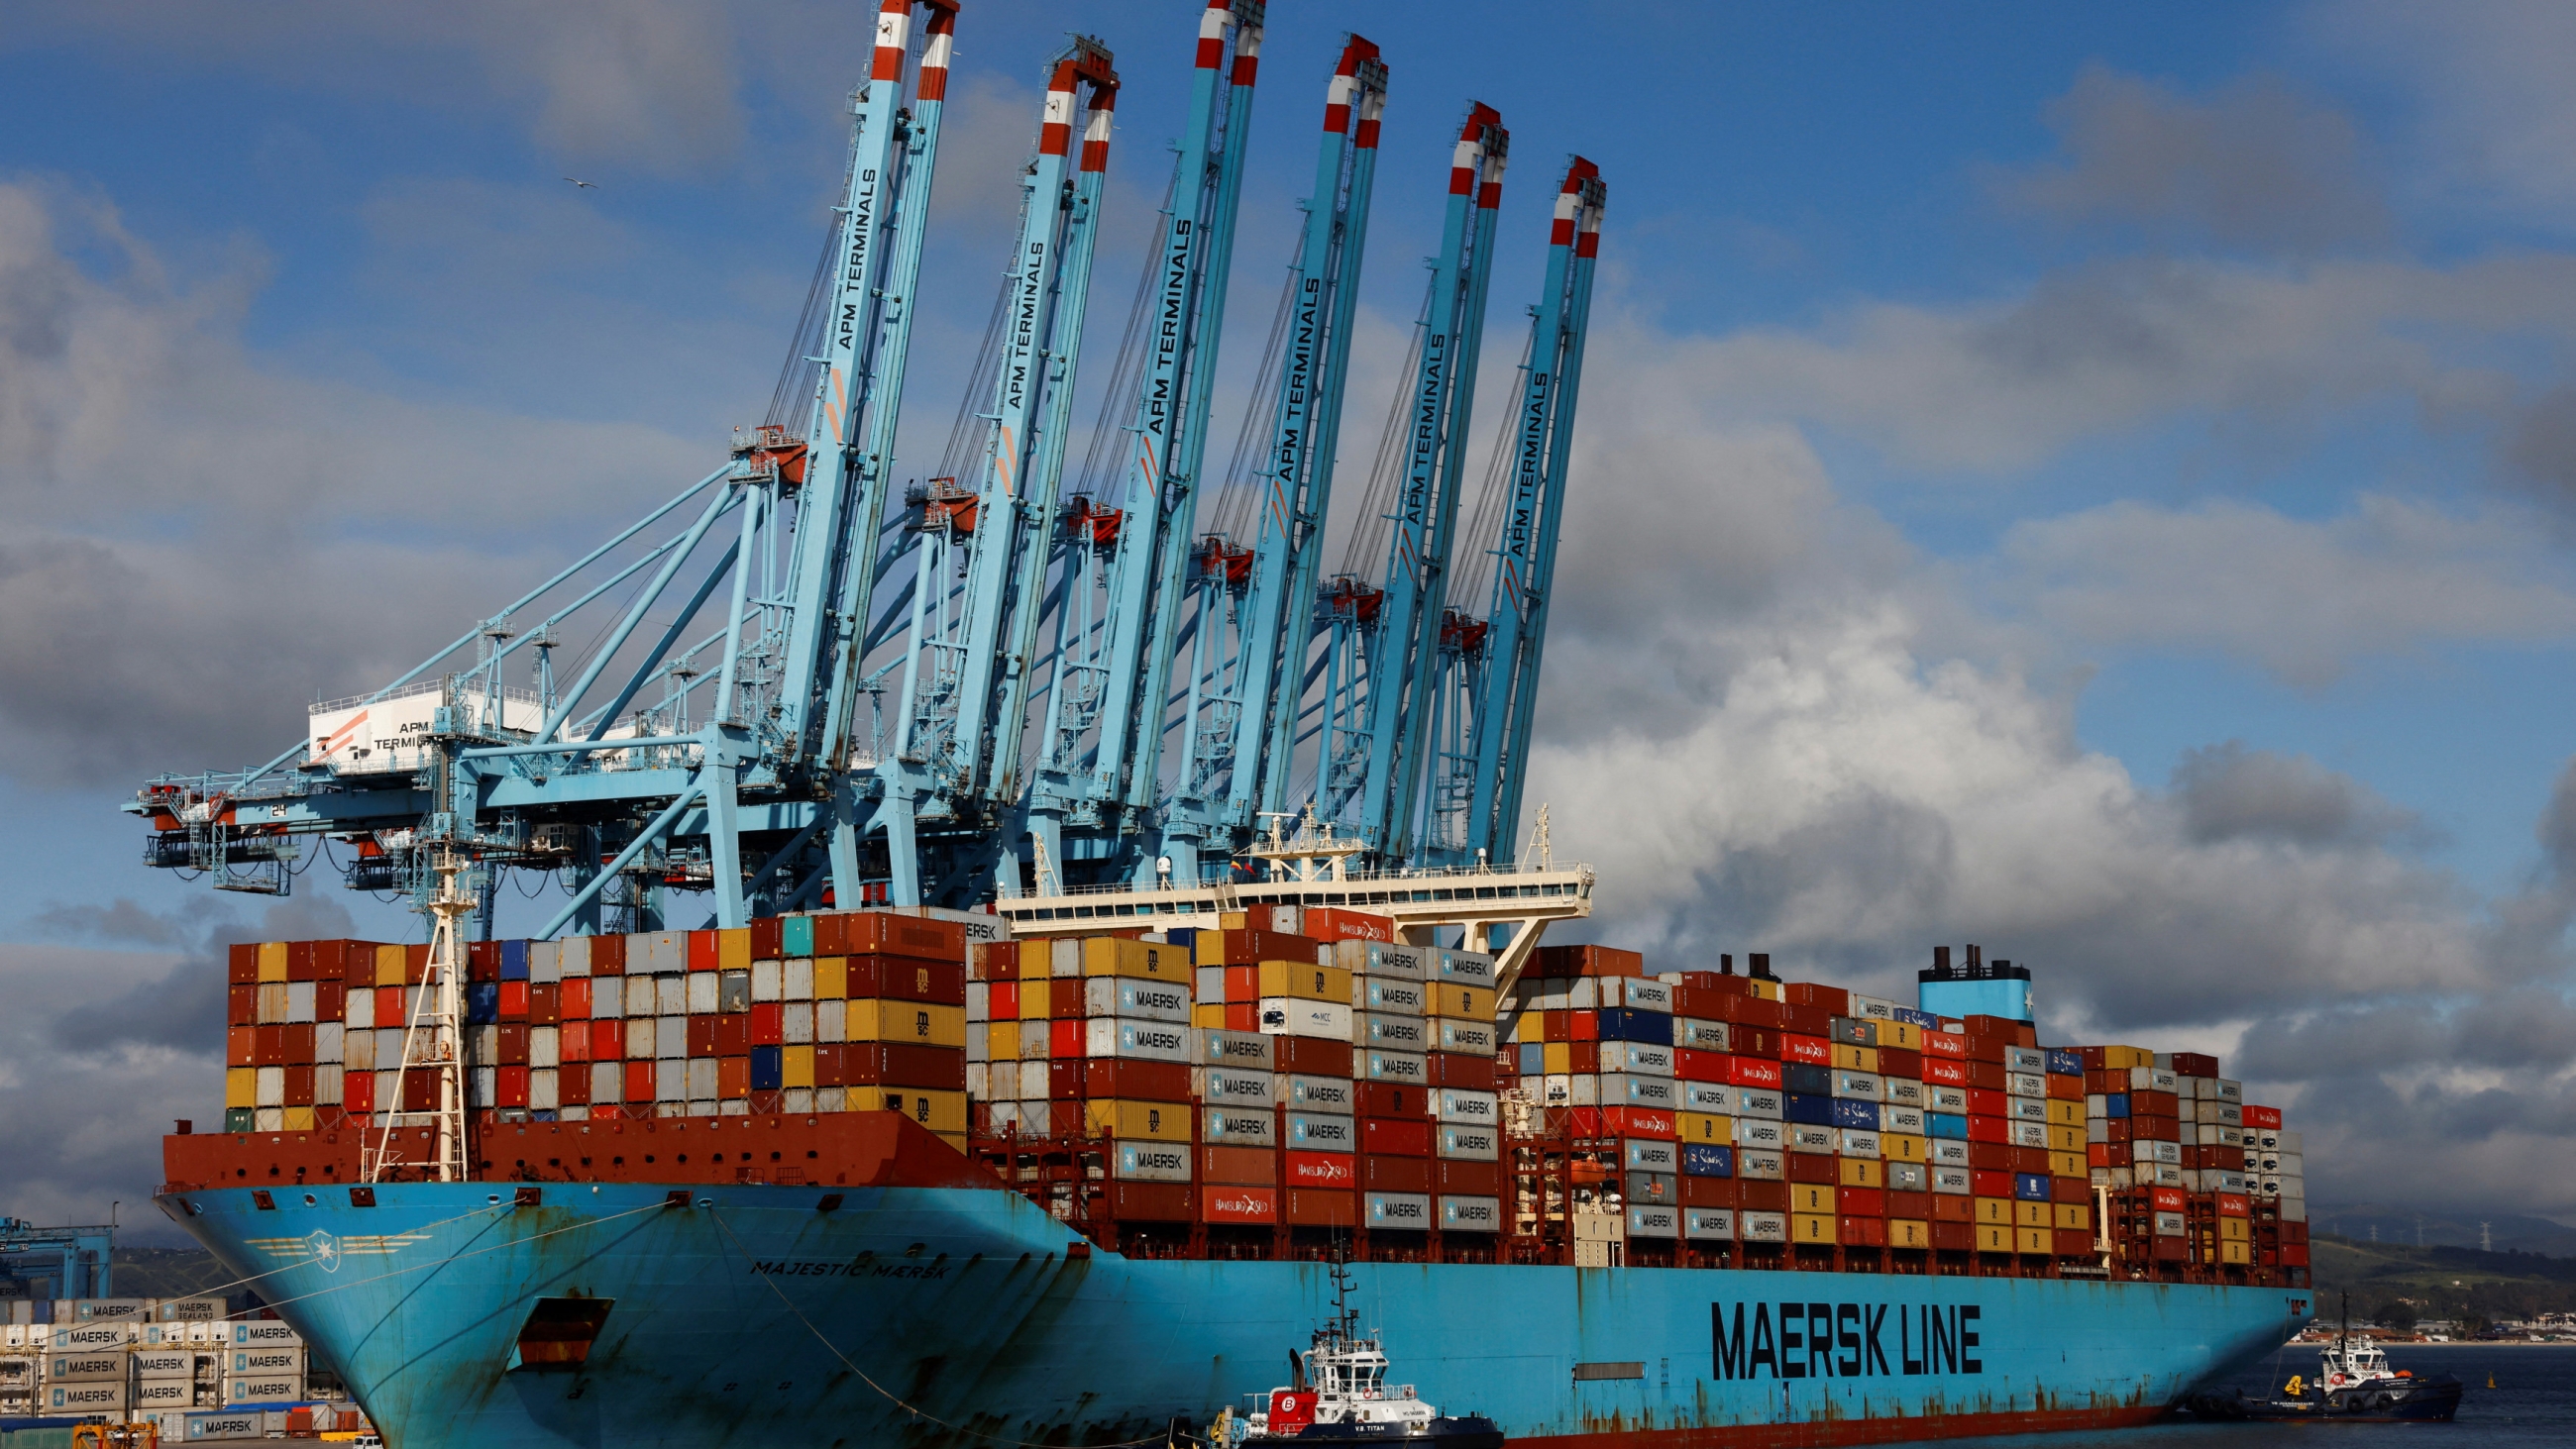 Containers are seen on the Maersk's Triple-E giant container ship Majestic Maersk, one of the world's largest container ships, in the port of Algeciras, Spain 20 January 2023 (Reuters)